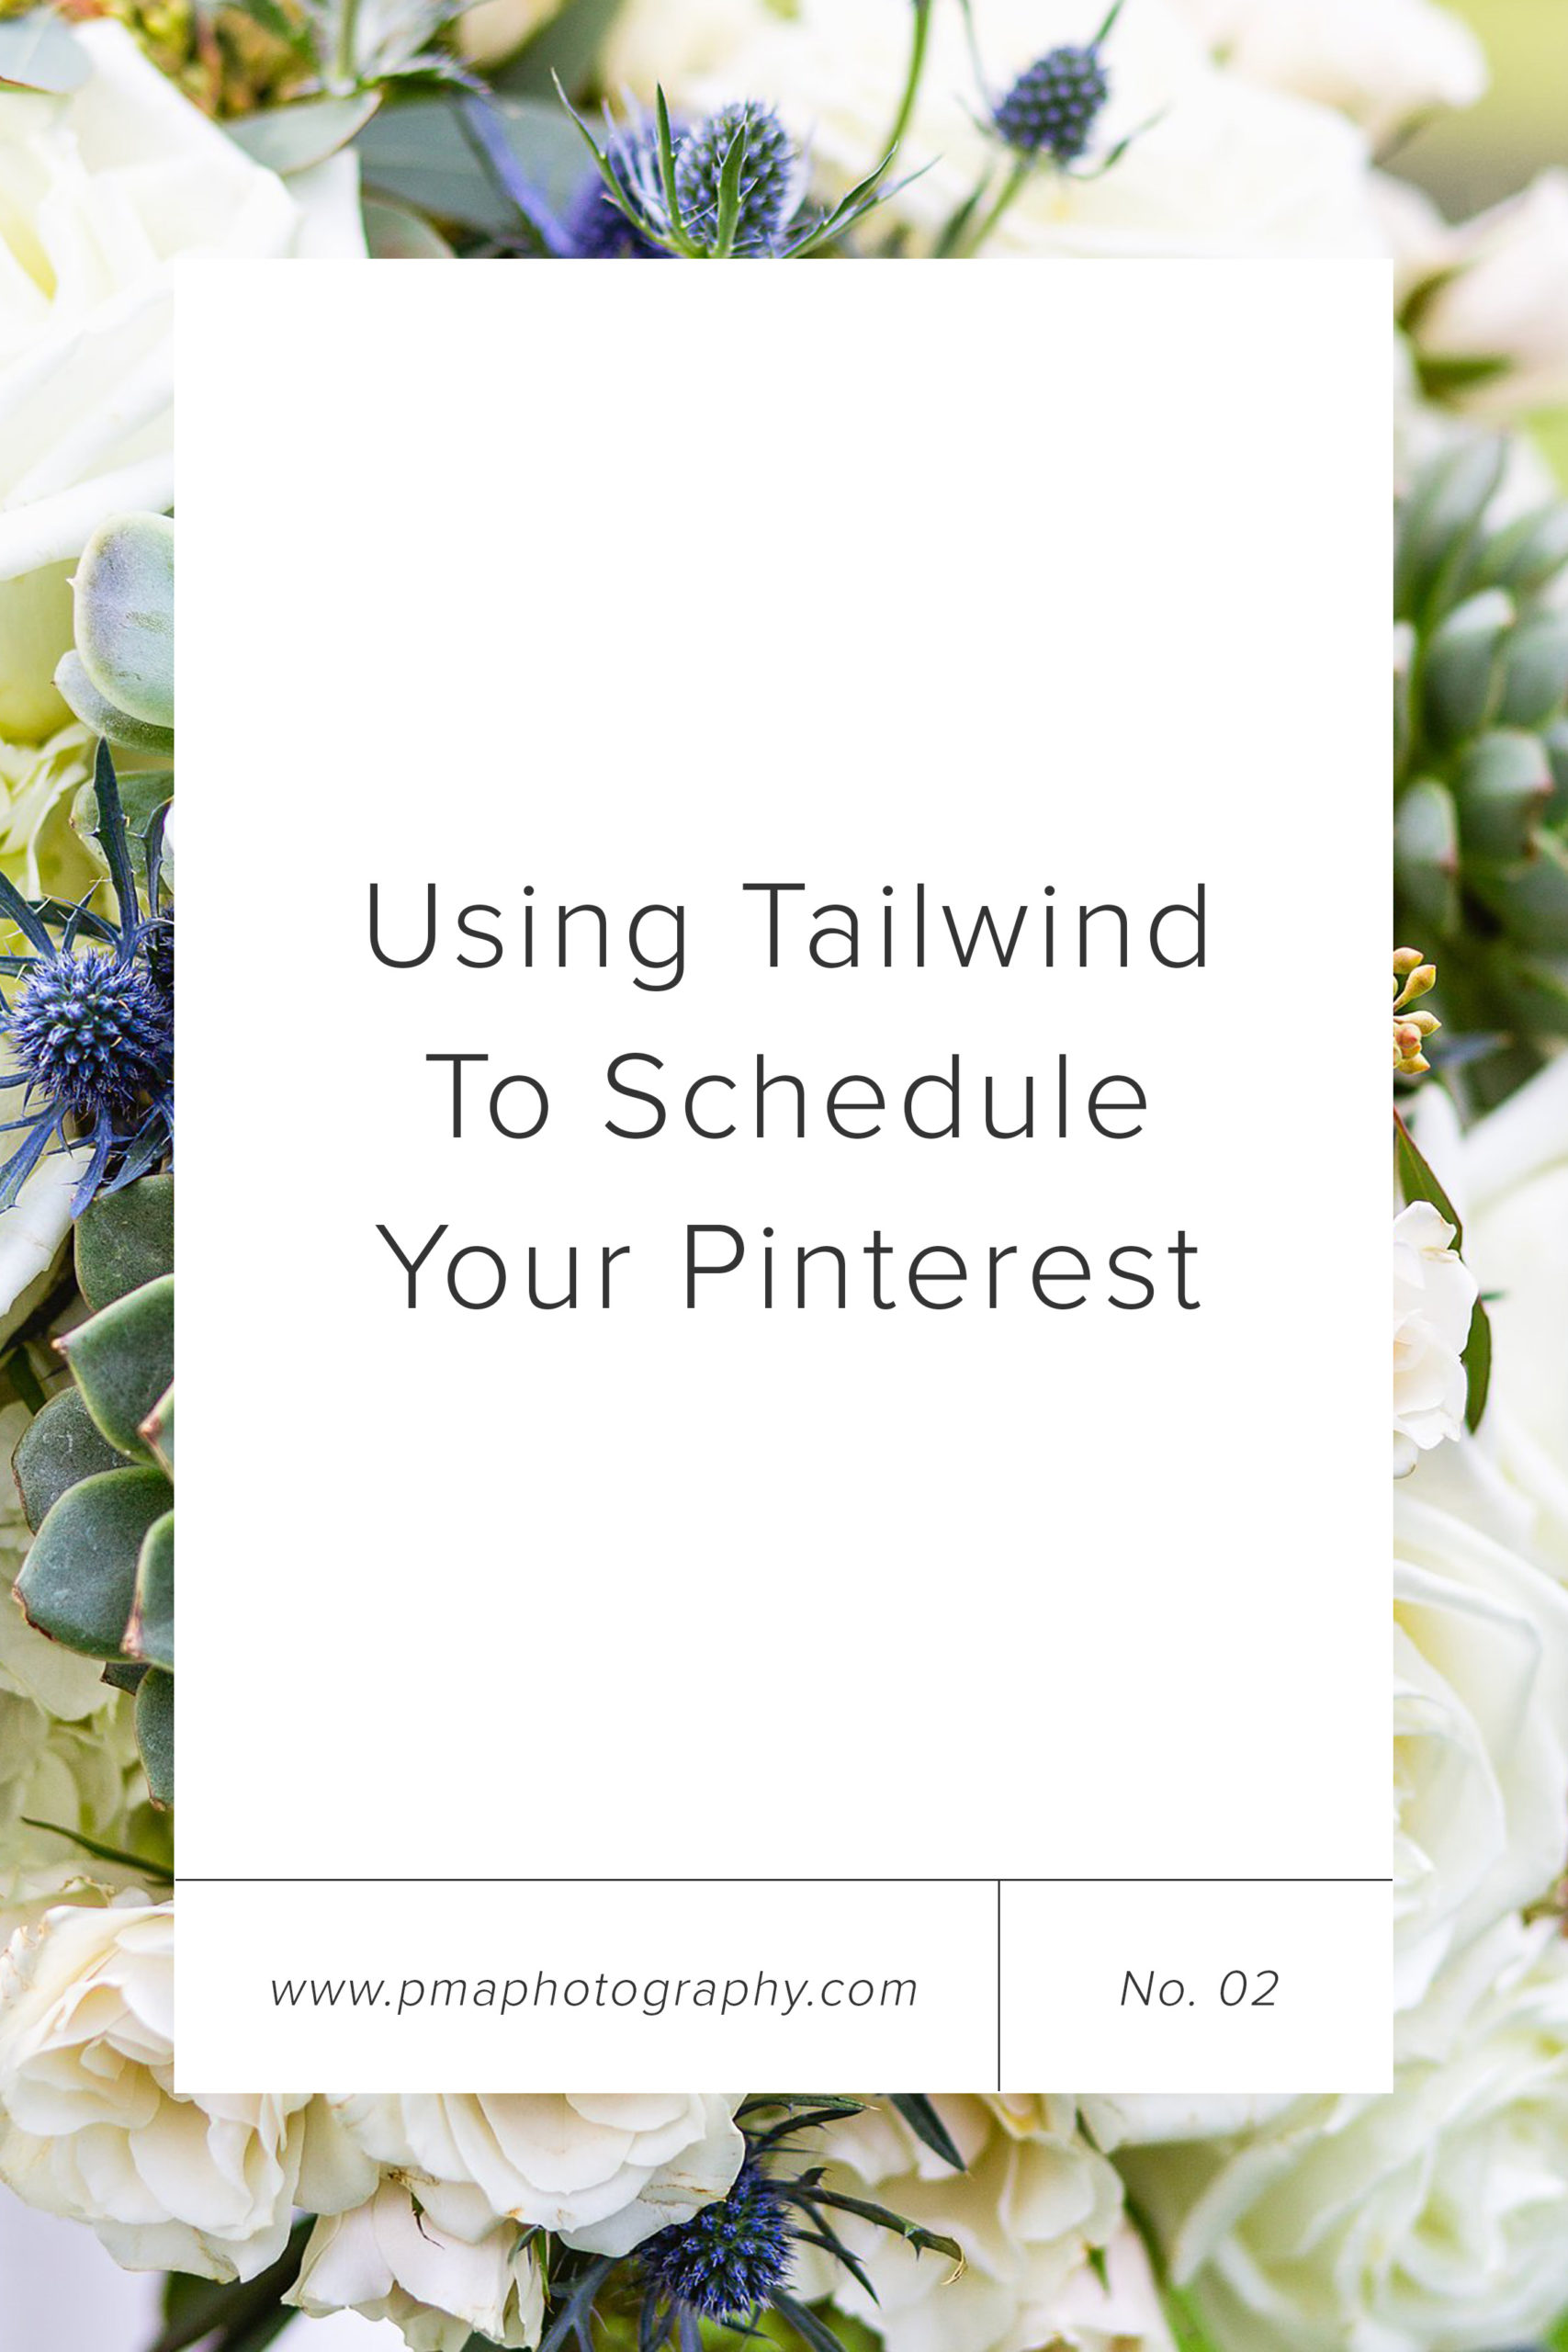 How to use Tailwind to schedule your Pinterest marketing by PMA Photography.